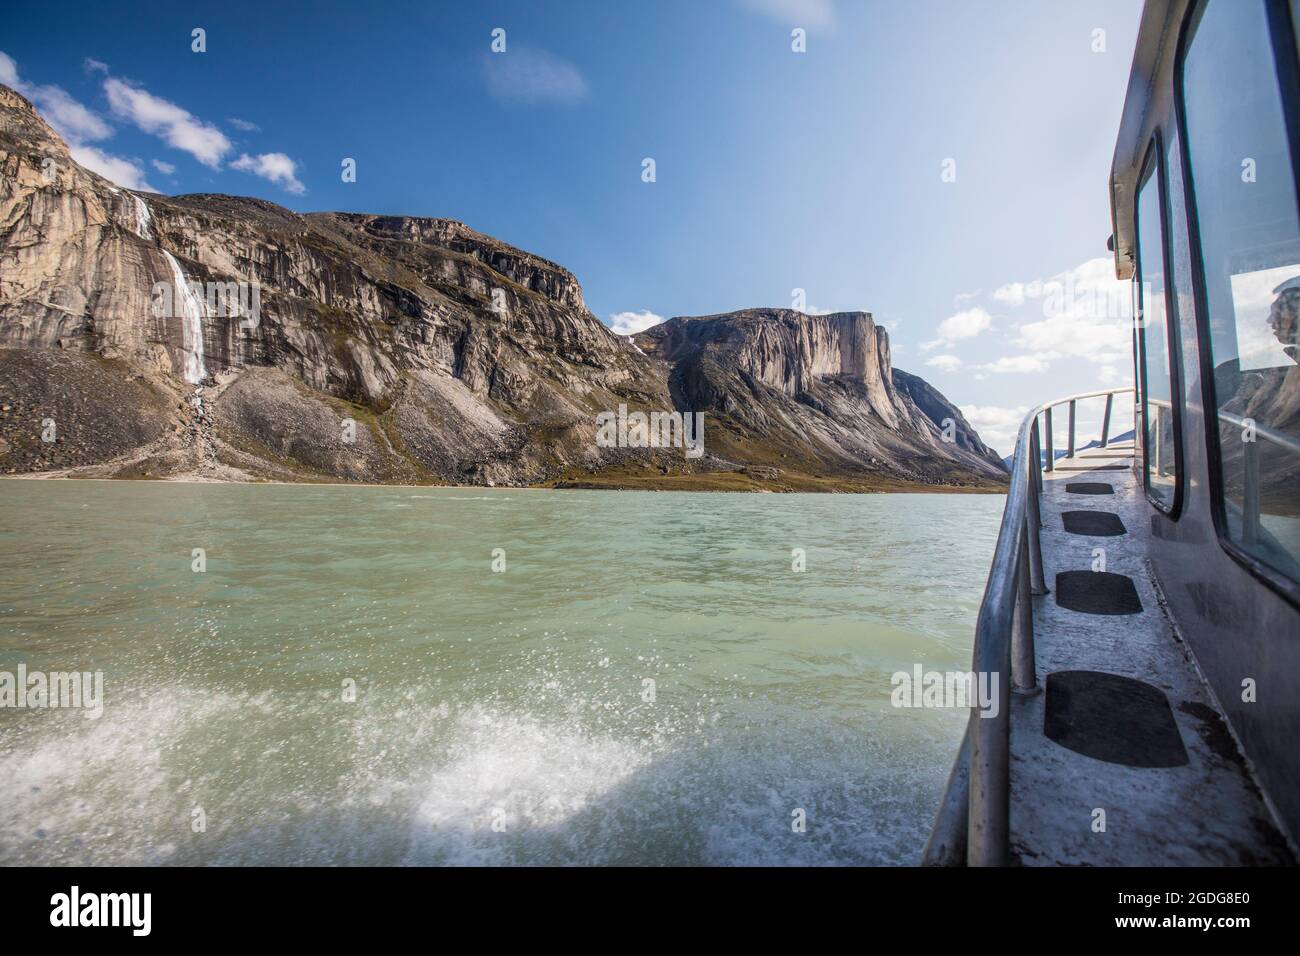 Scenic view of fjord on Baffin Island from a aluminum boat. Stock Photo